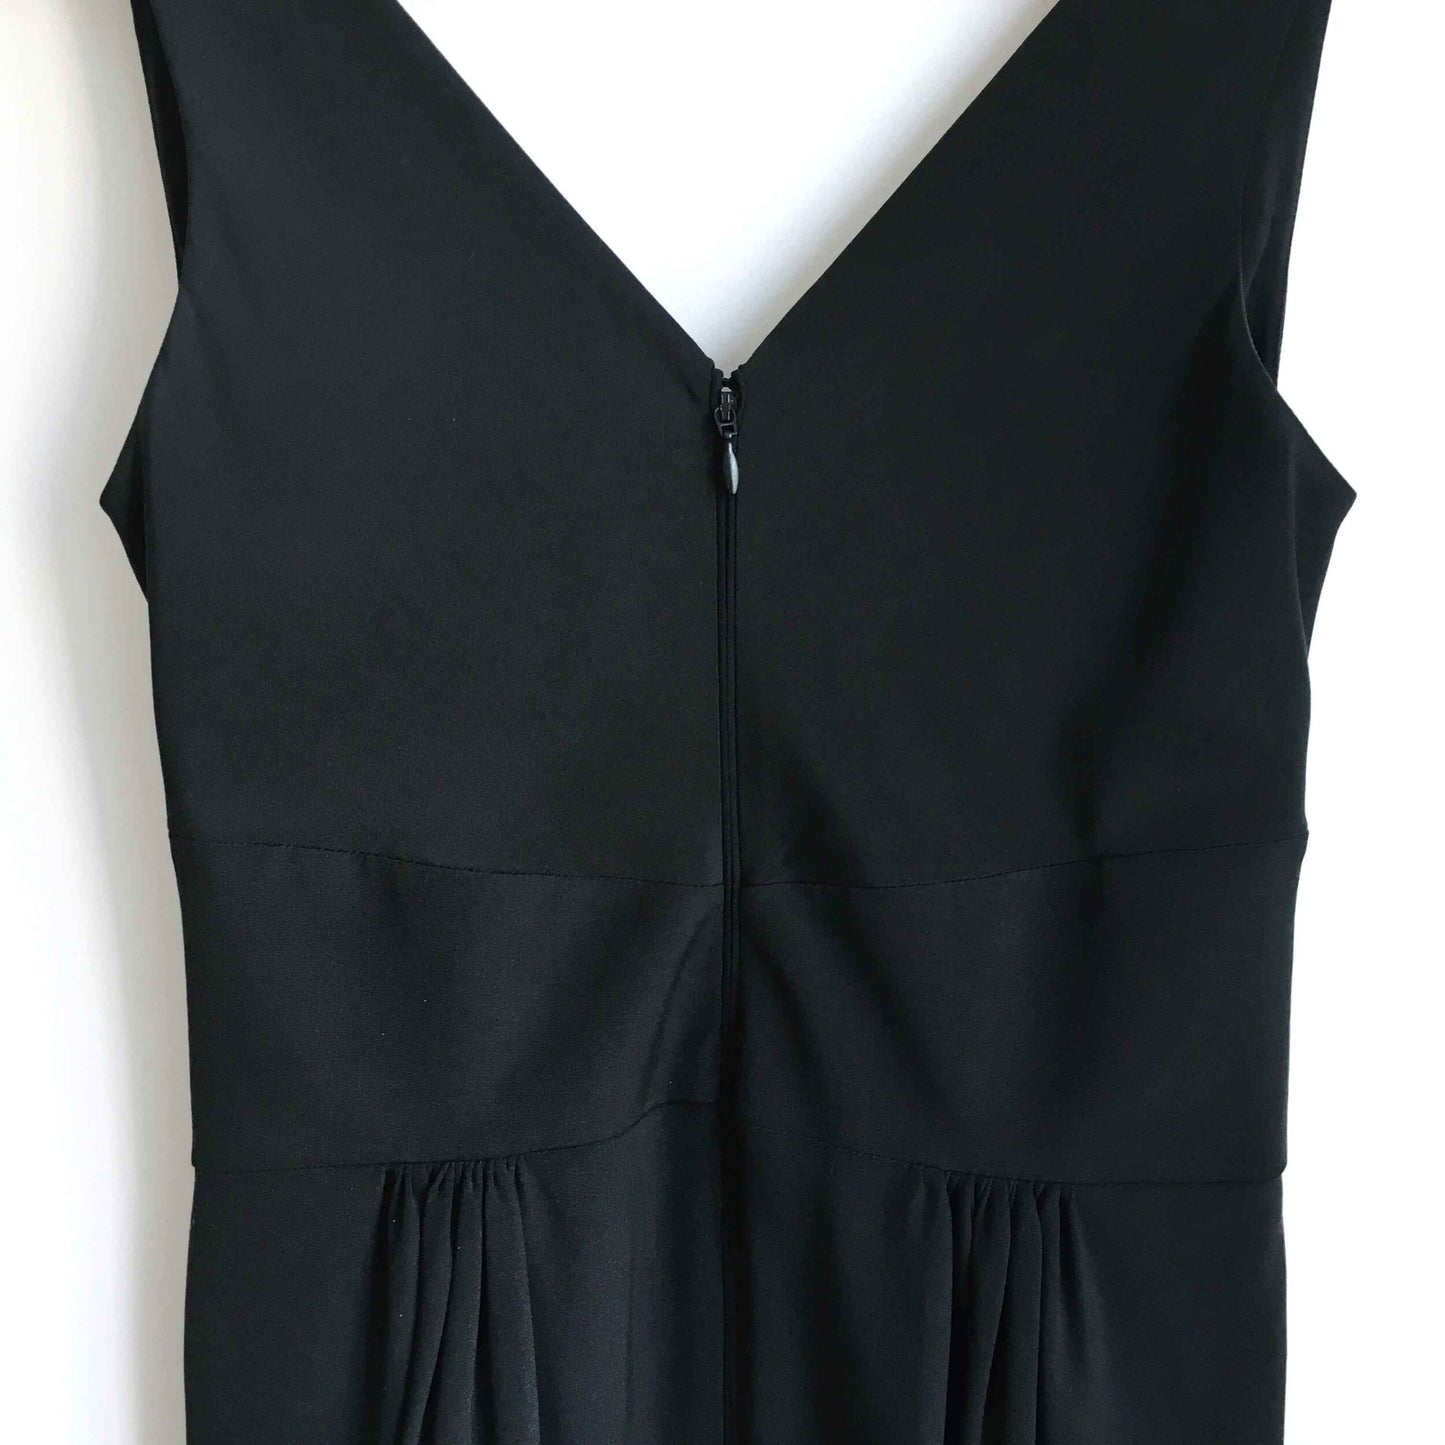 DSQUARED silk cocktail dress with bow neck - size 44